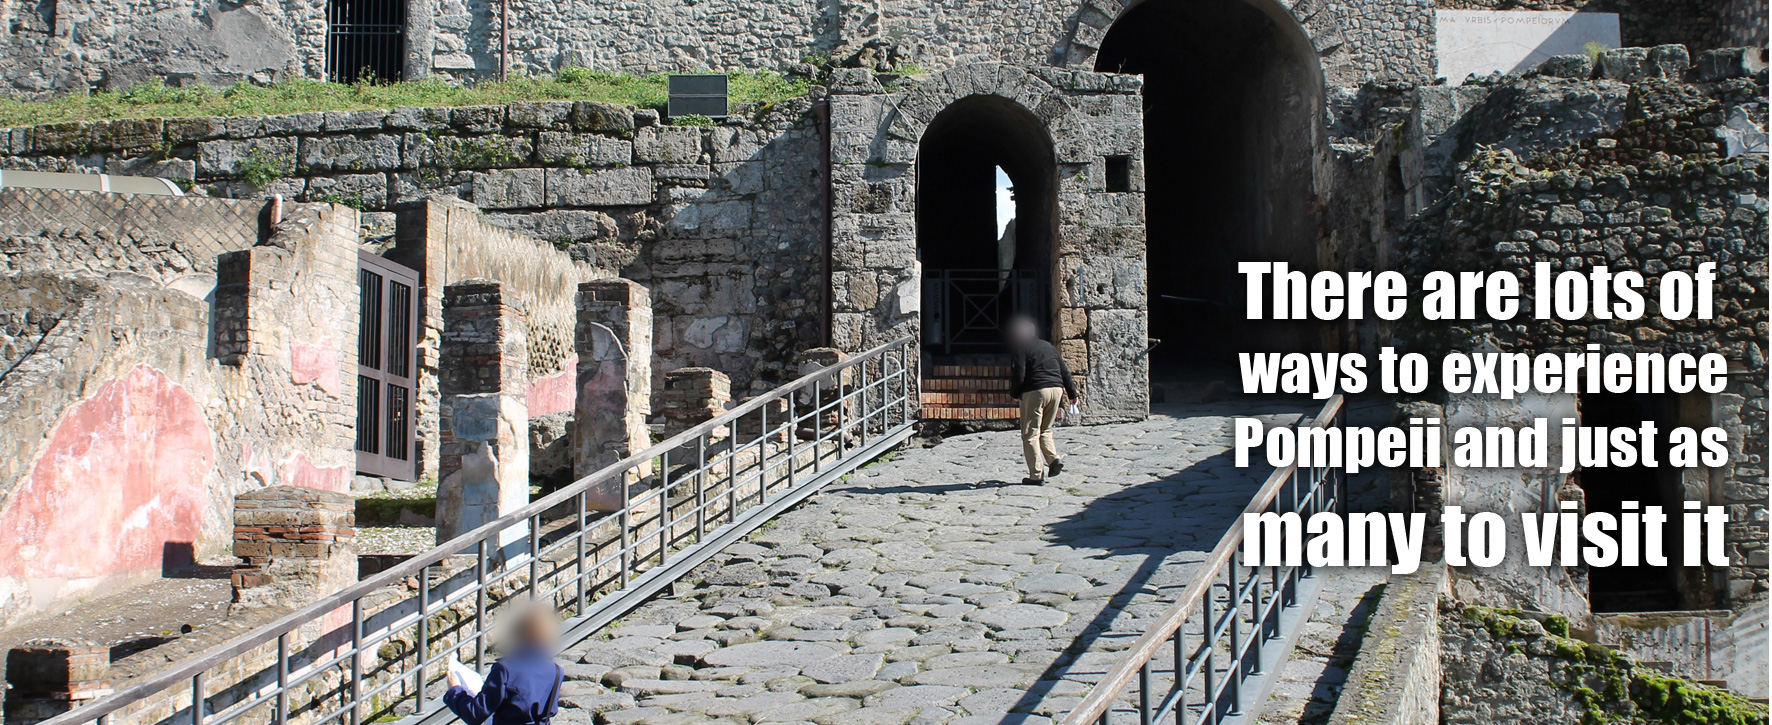 There are lots of ways to experience Pompeii and just as many to visit it